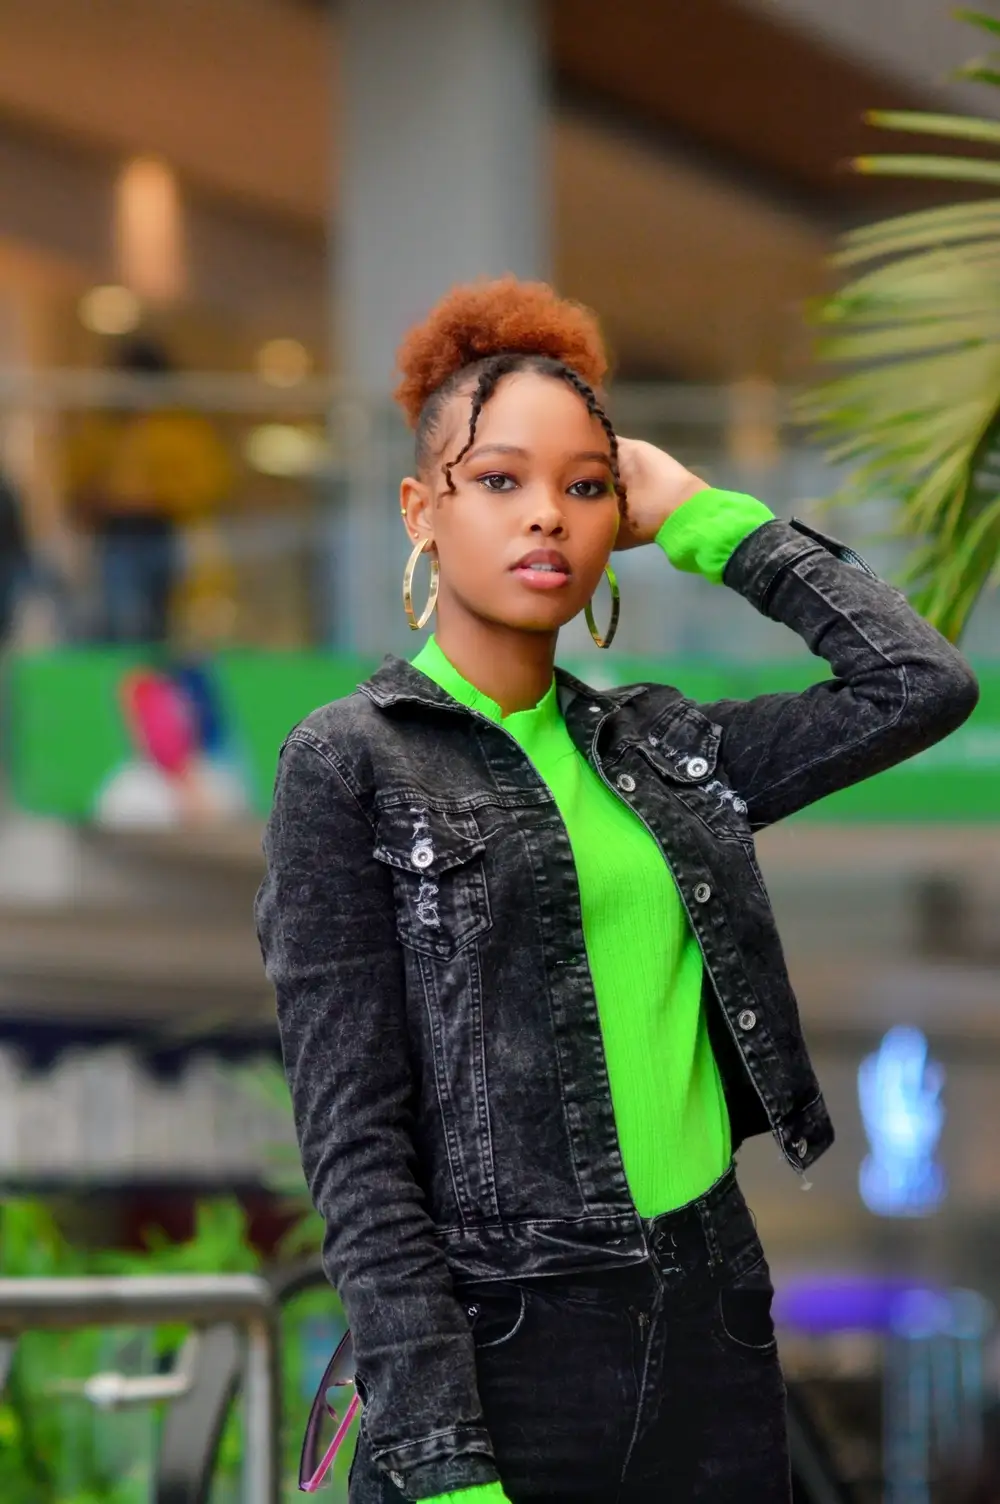 Woman poses in green shirt and denim jacket